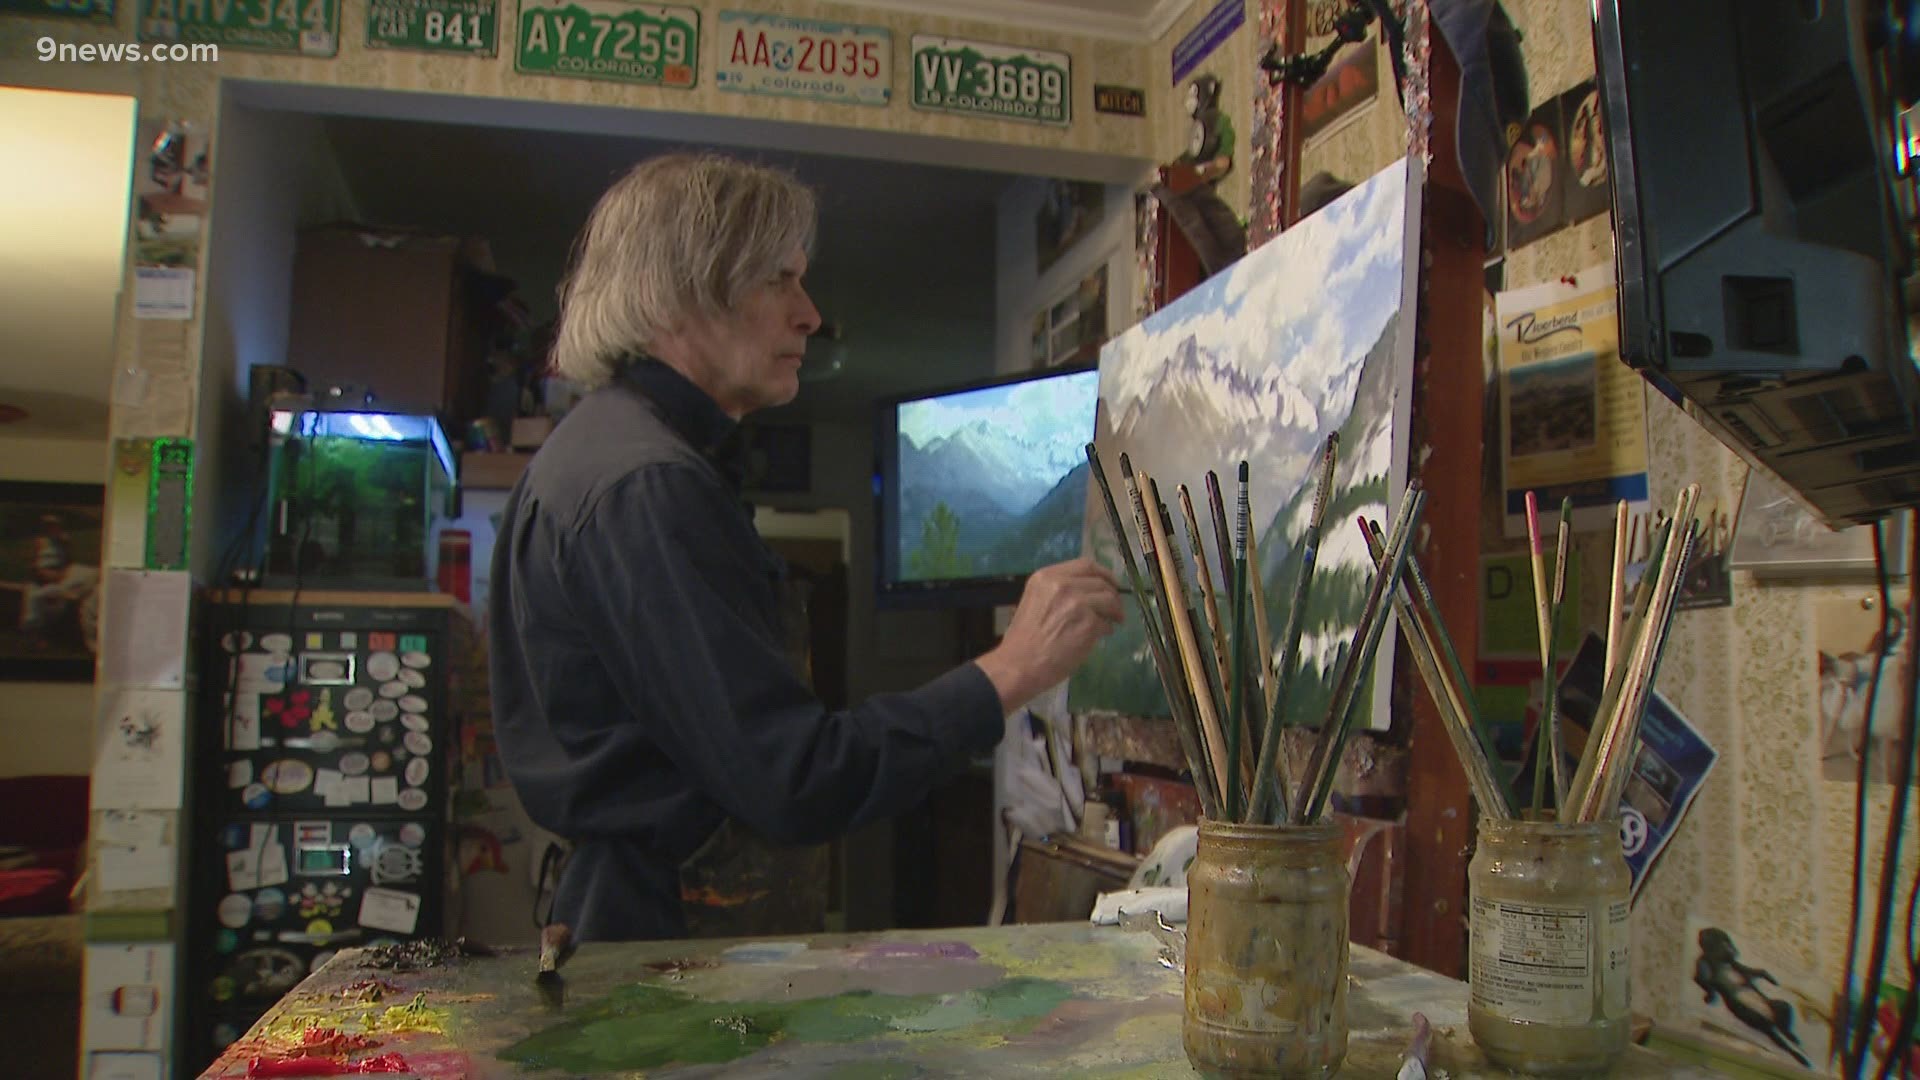 Former 9NEWS courtroom artist Mitch Caster is known for his beautiful paintings, but his career started out in a much different way.